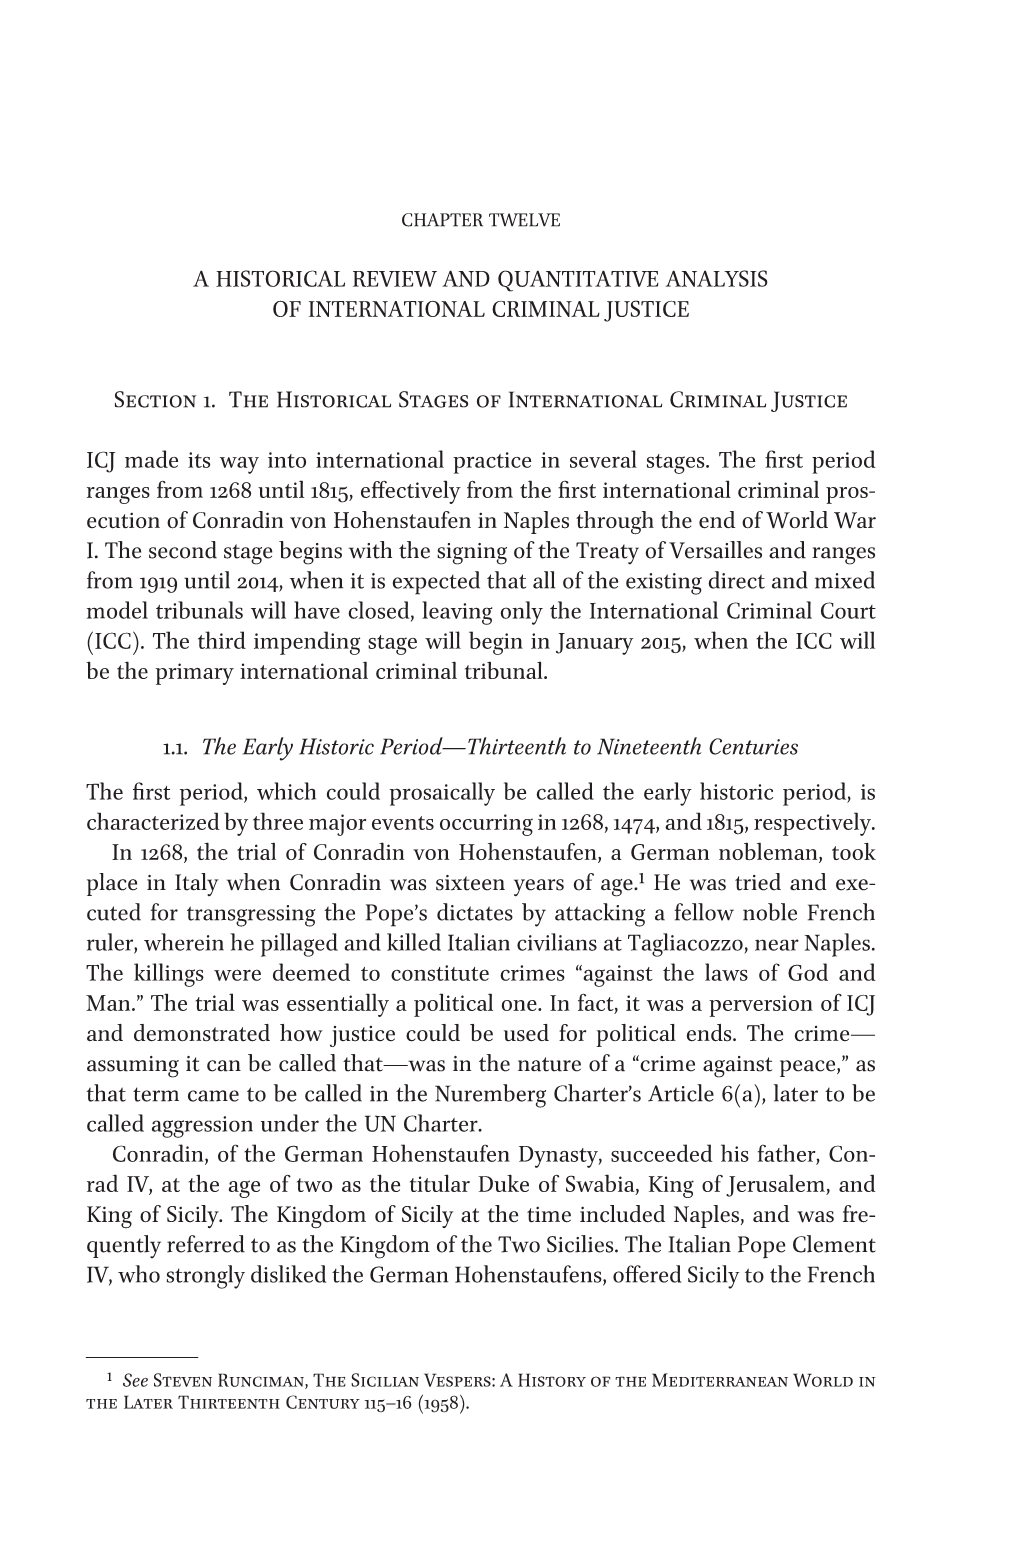 A Historical Review and Quantitative Analysis of International Criminal Justice